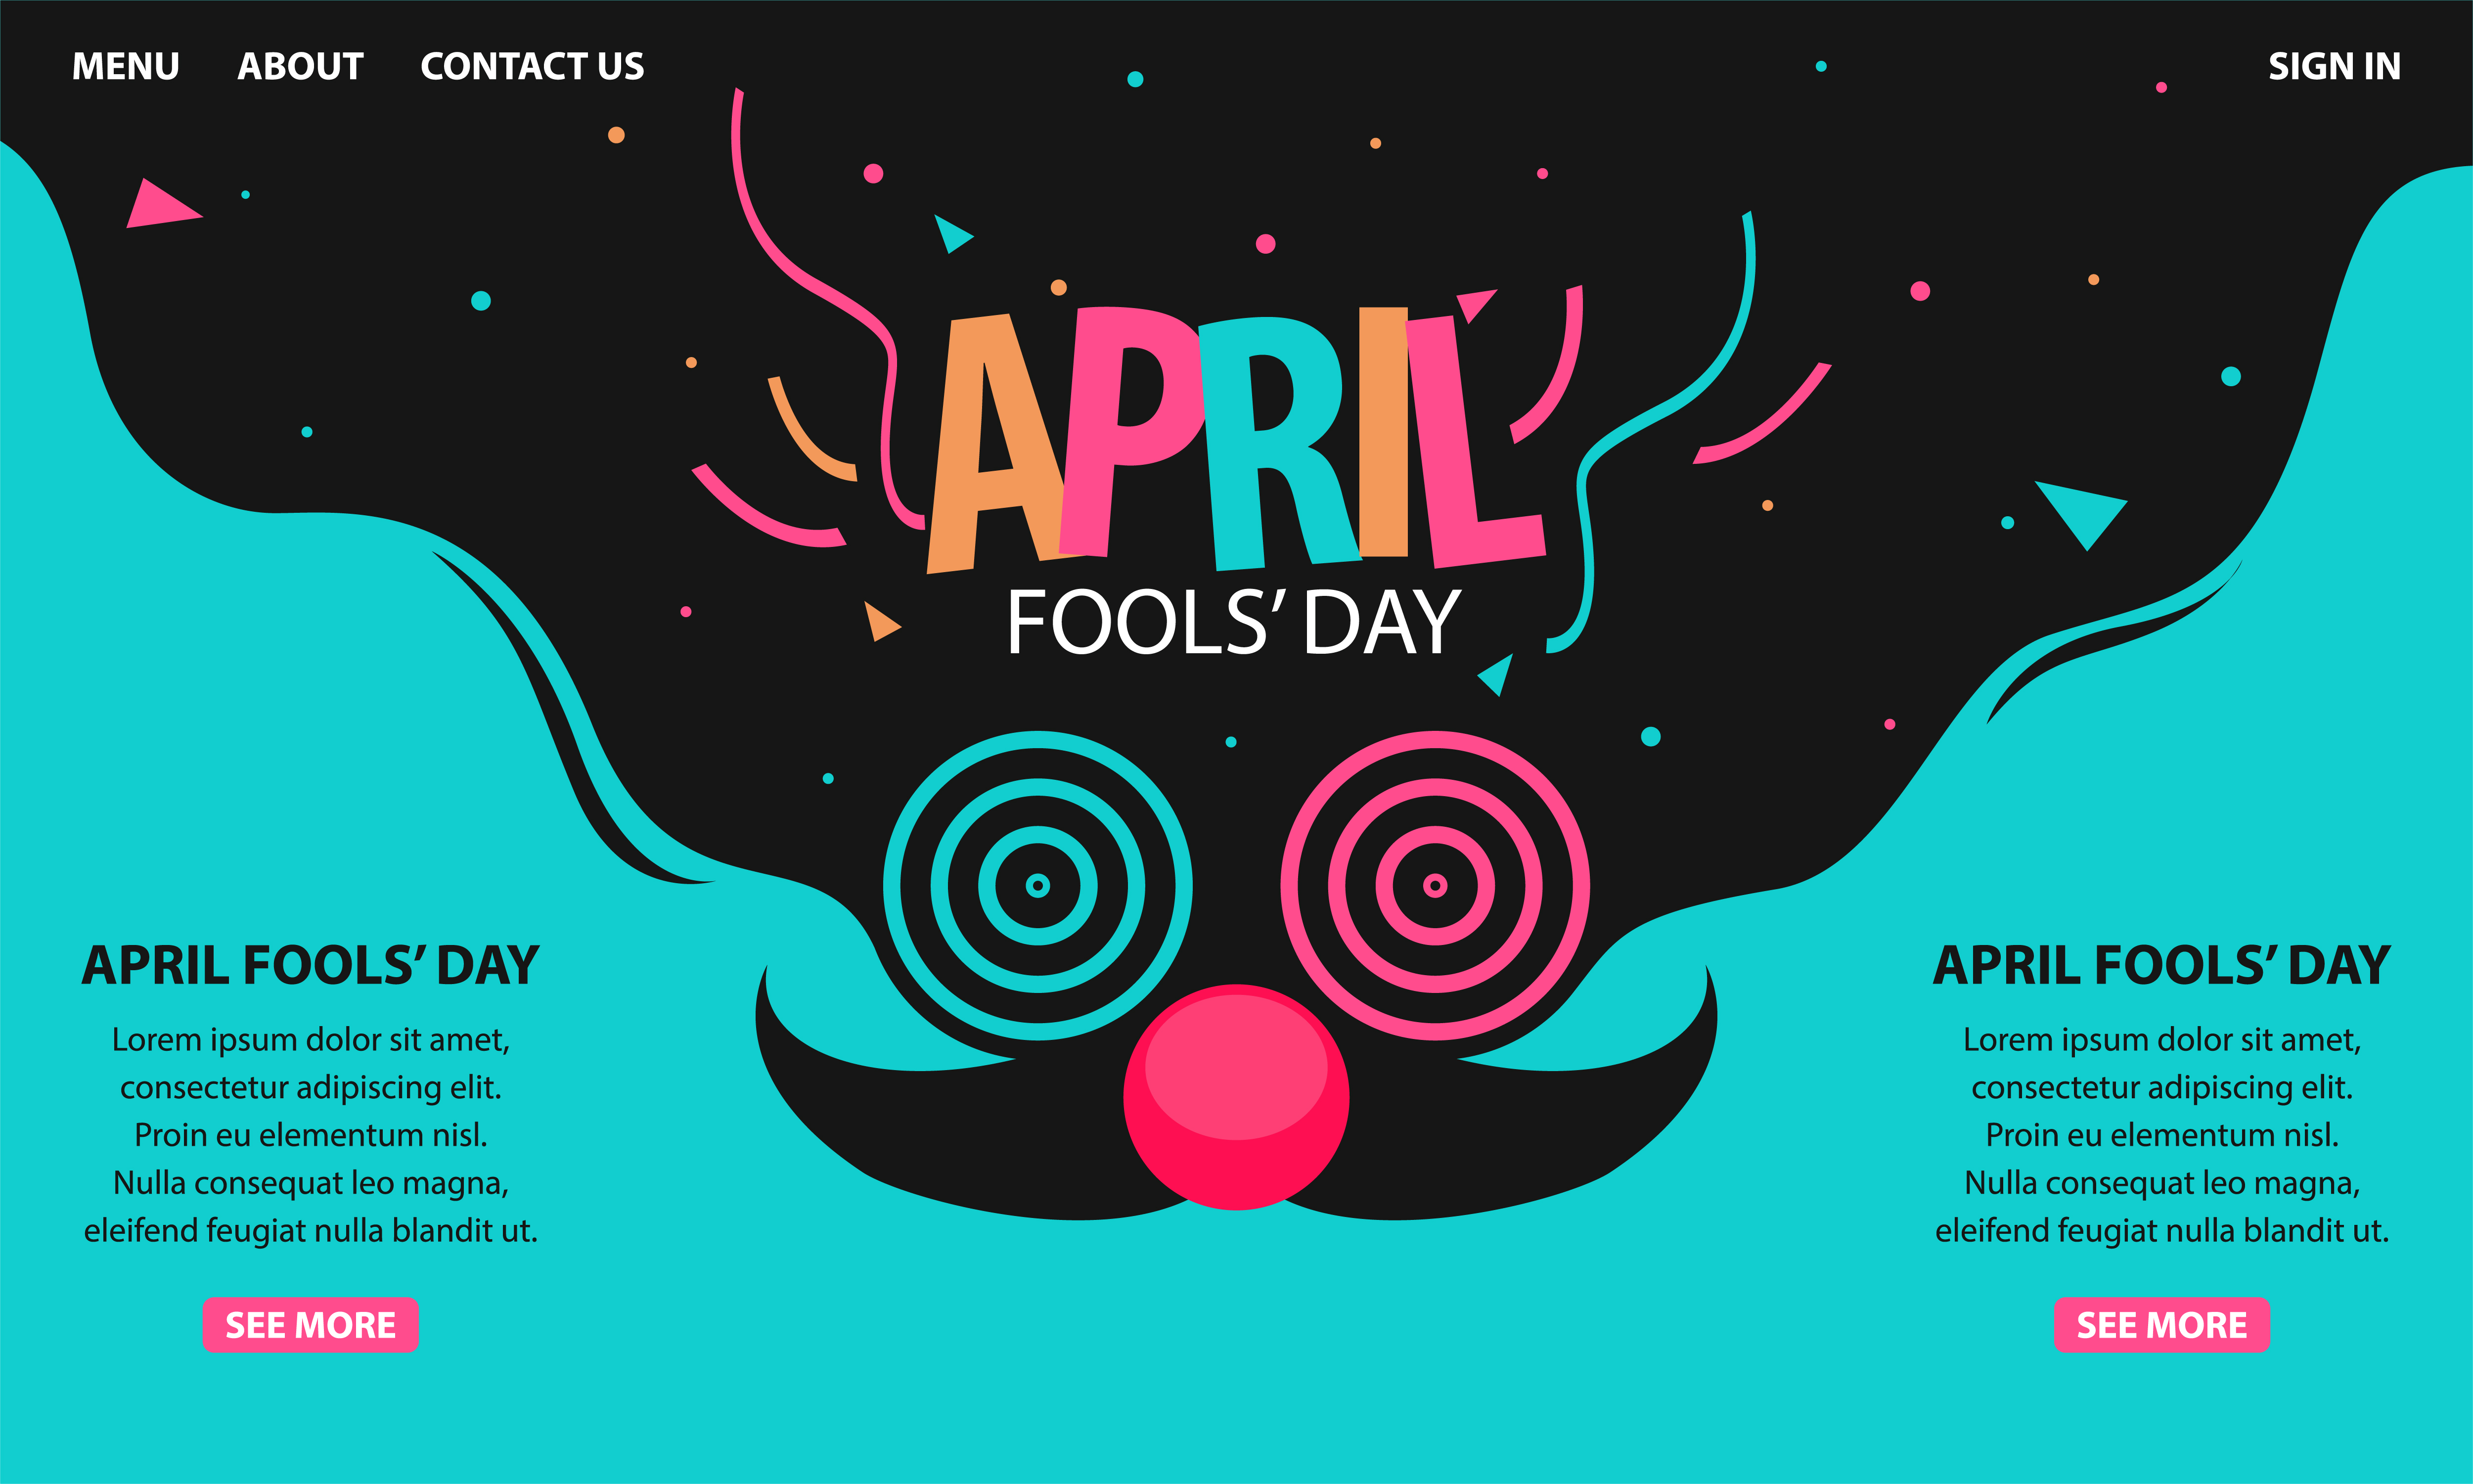 ¡Puaj! 42+  Hechos ocultos sobre   Fools' Day? 01.04.2020 · april fools’ day traditions are all about practical jokes, playing pranks, and having fun.